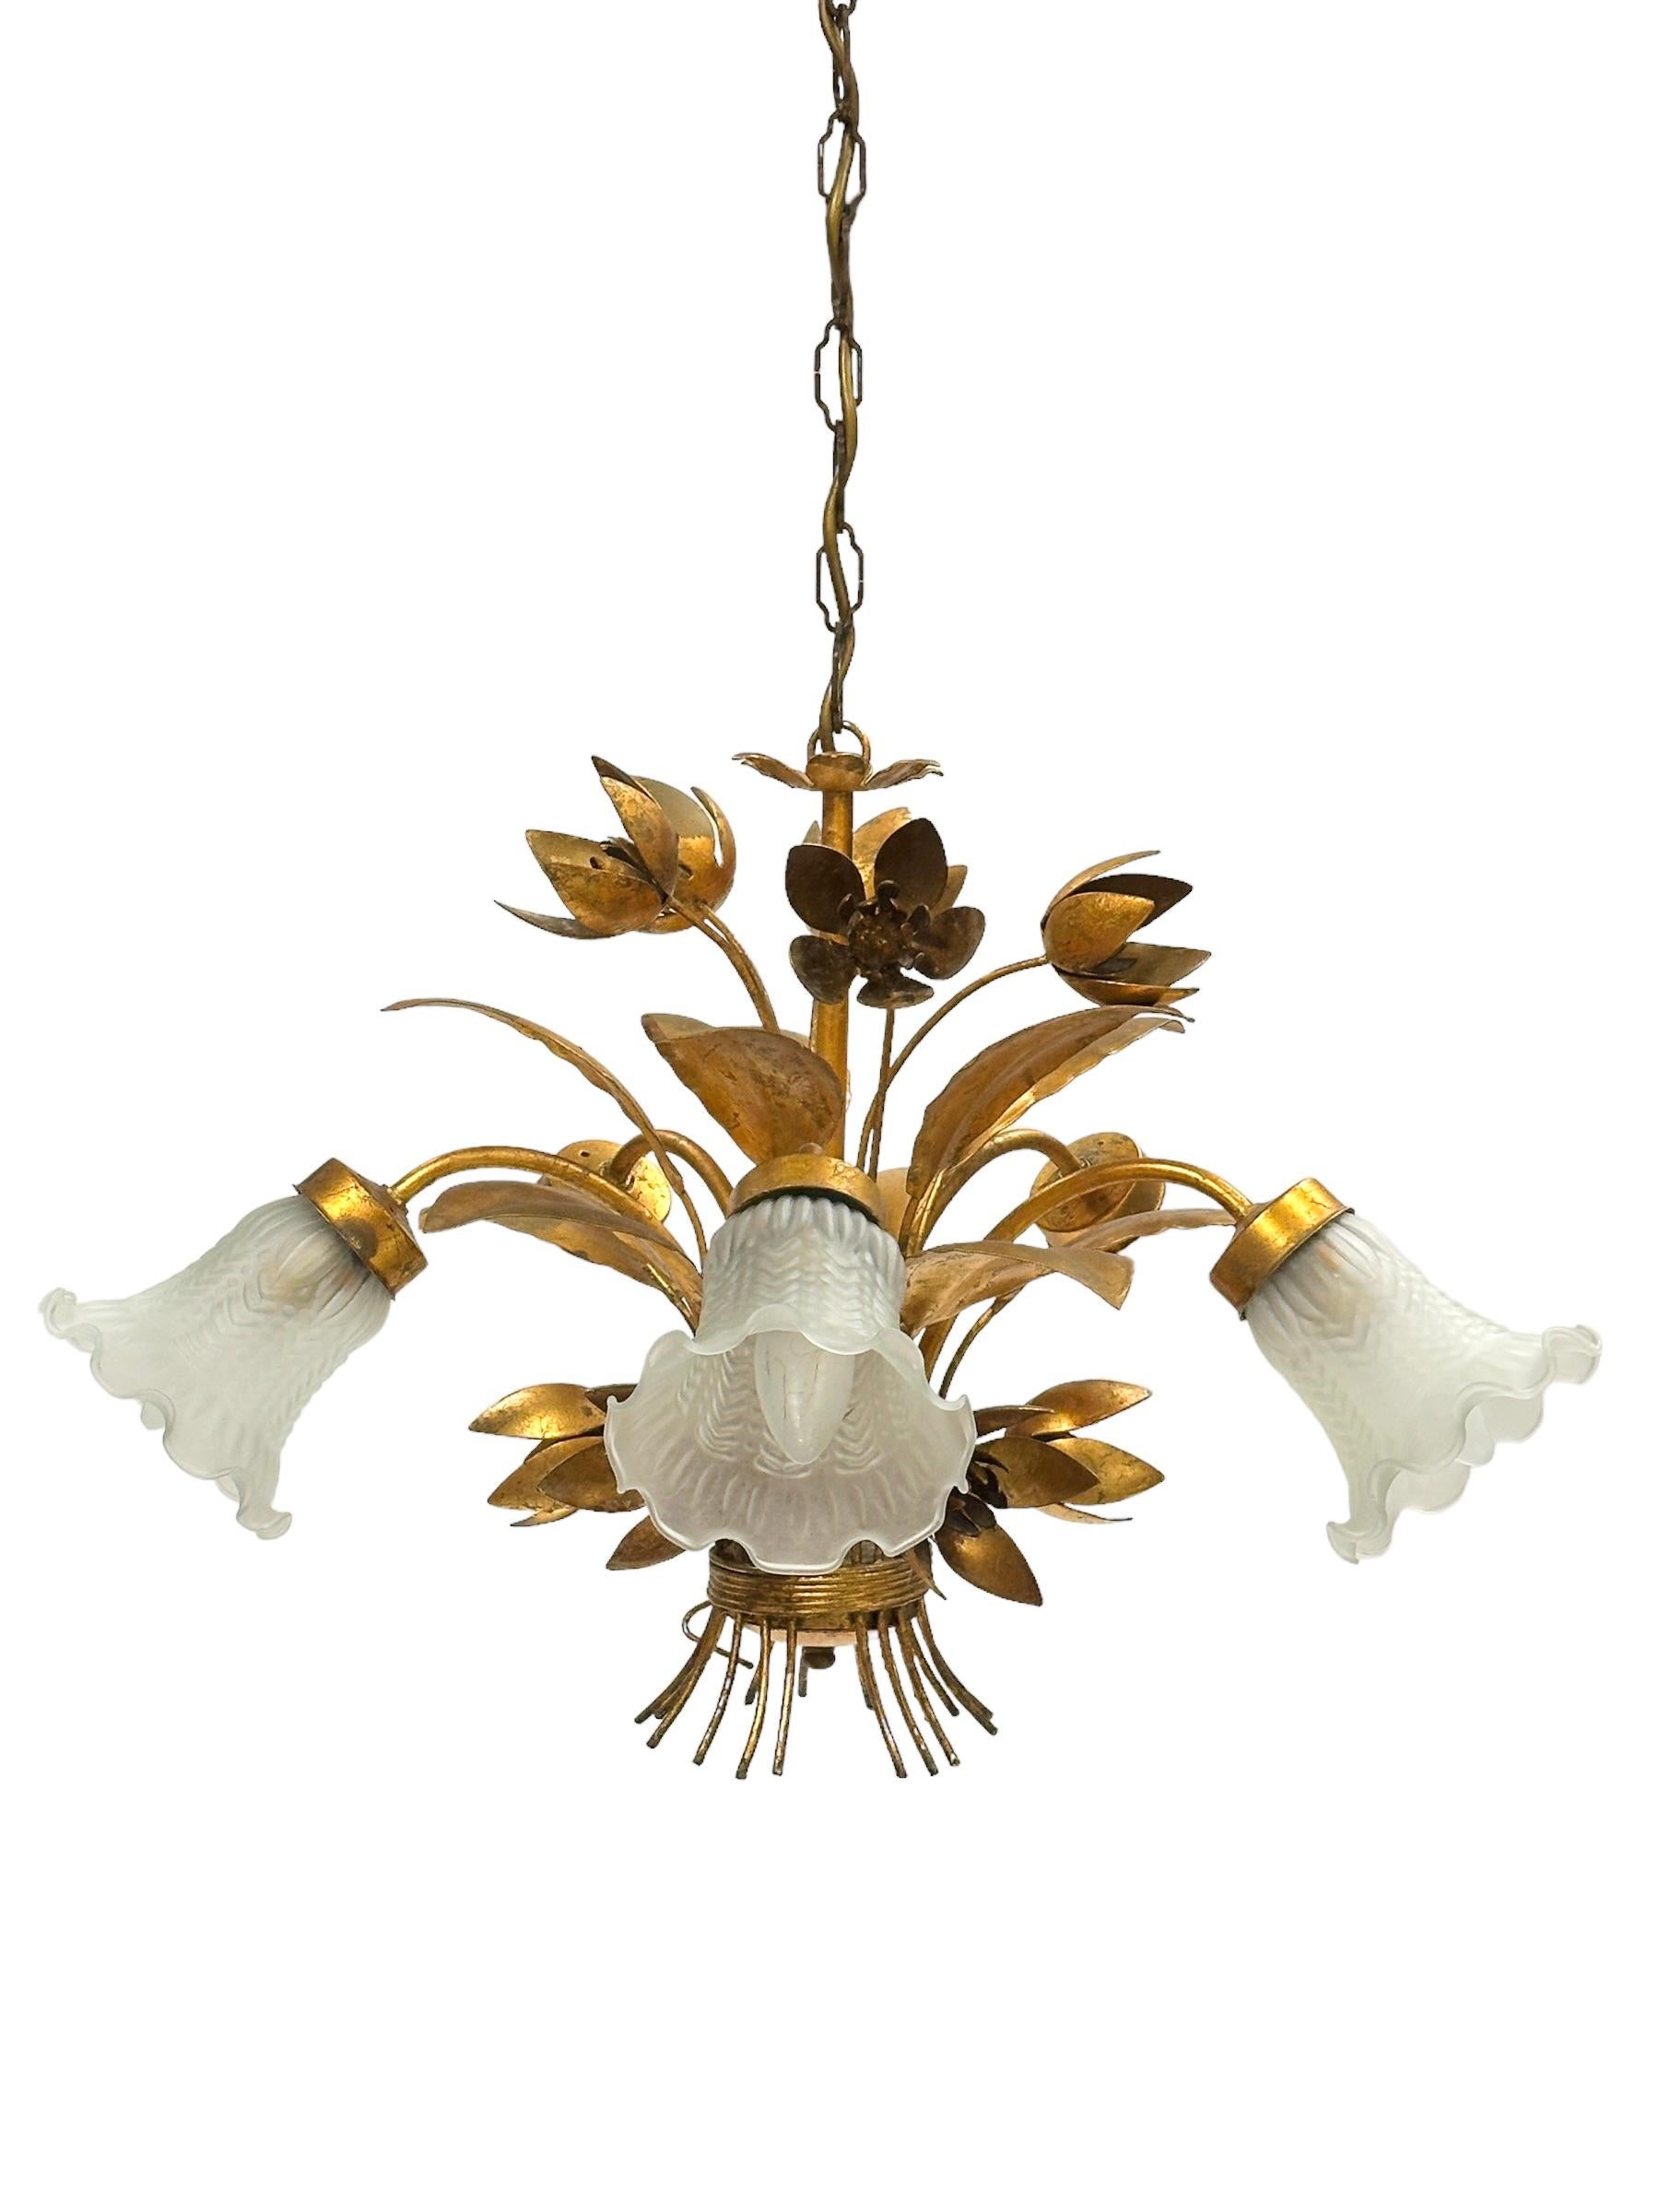 A Hollywood Regency midcentury gilt and tole bunch of flowers chandelier in Coco Chanel Style with beautiful glass shades, the fixture requires five European E14 candelabra bulbs, each bulb up to 40 watts. Chandelier part itself is approx. 17 inches